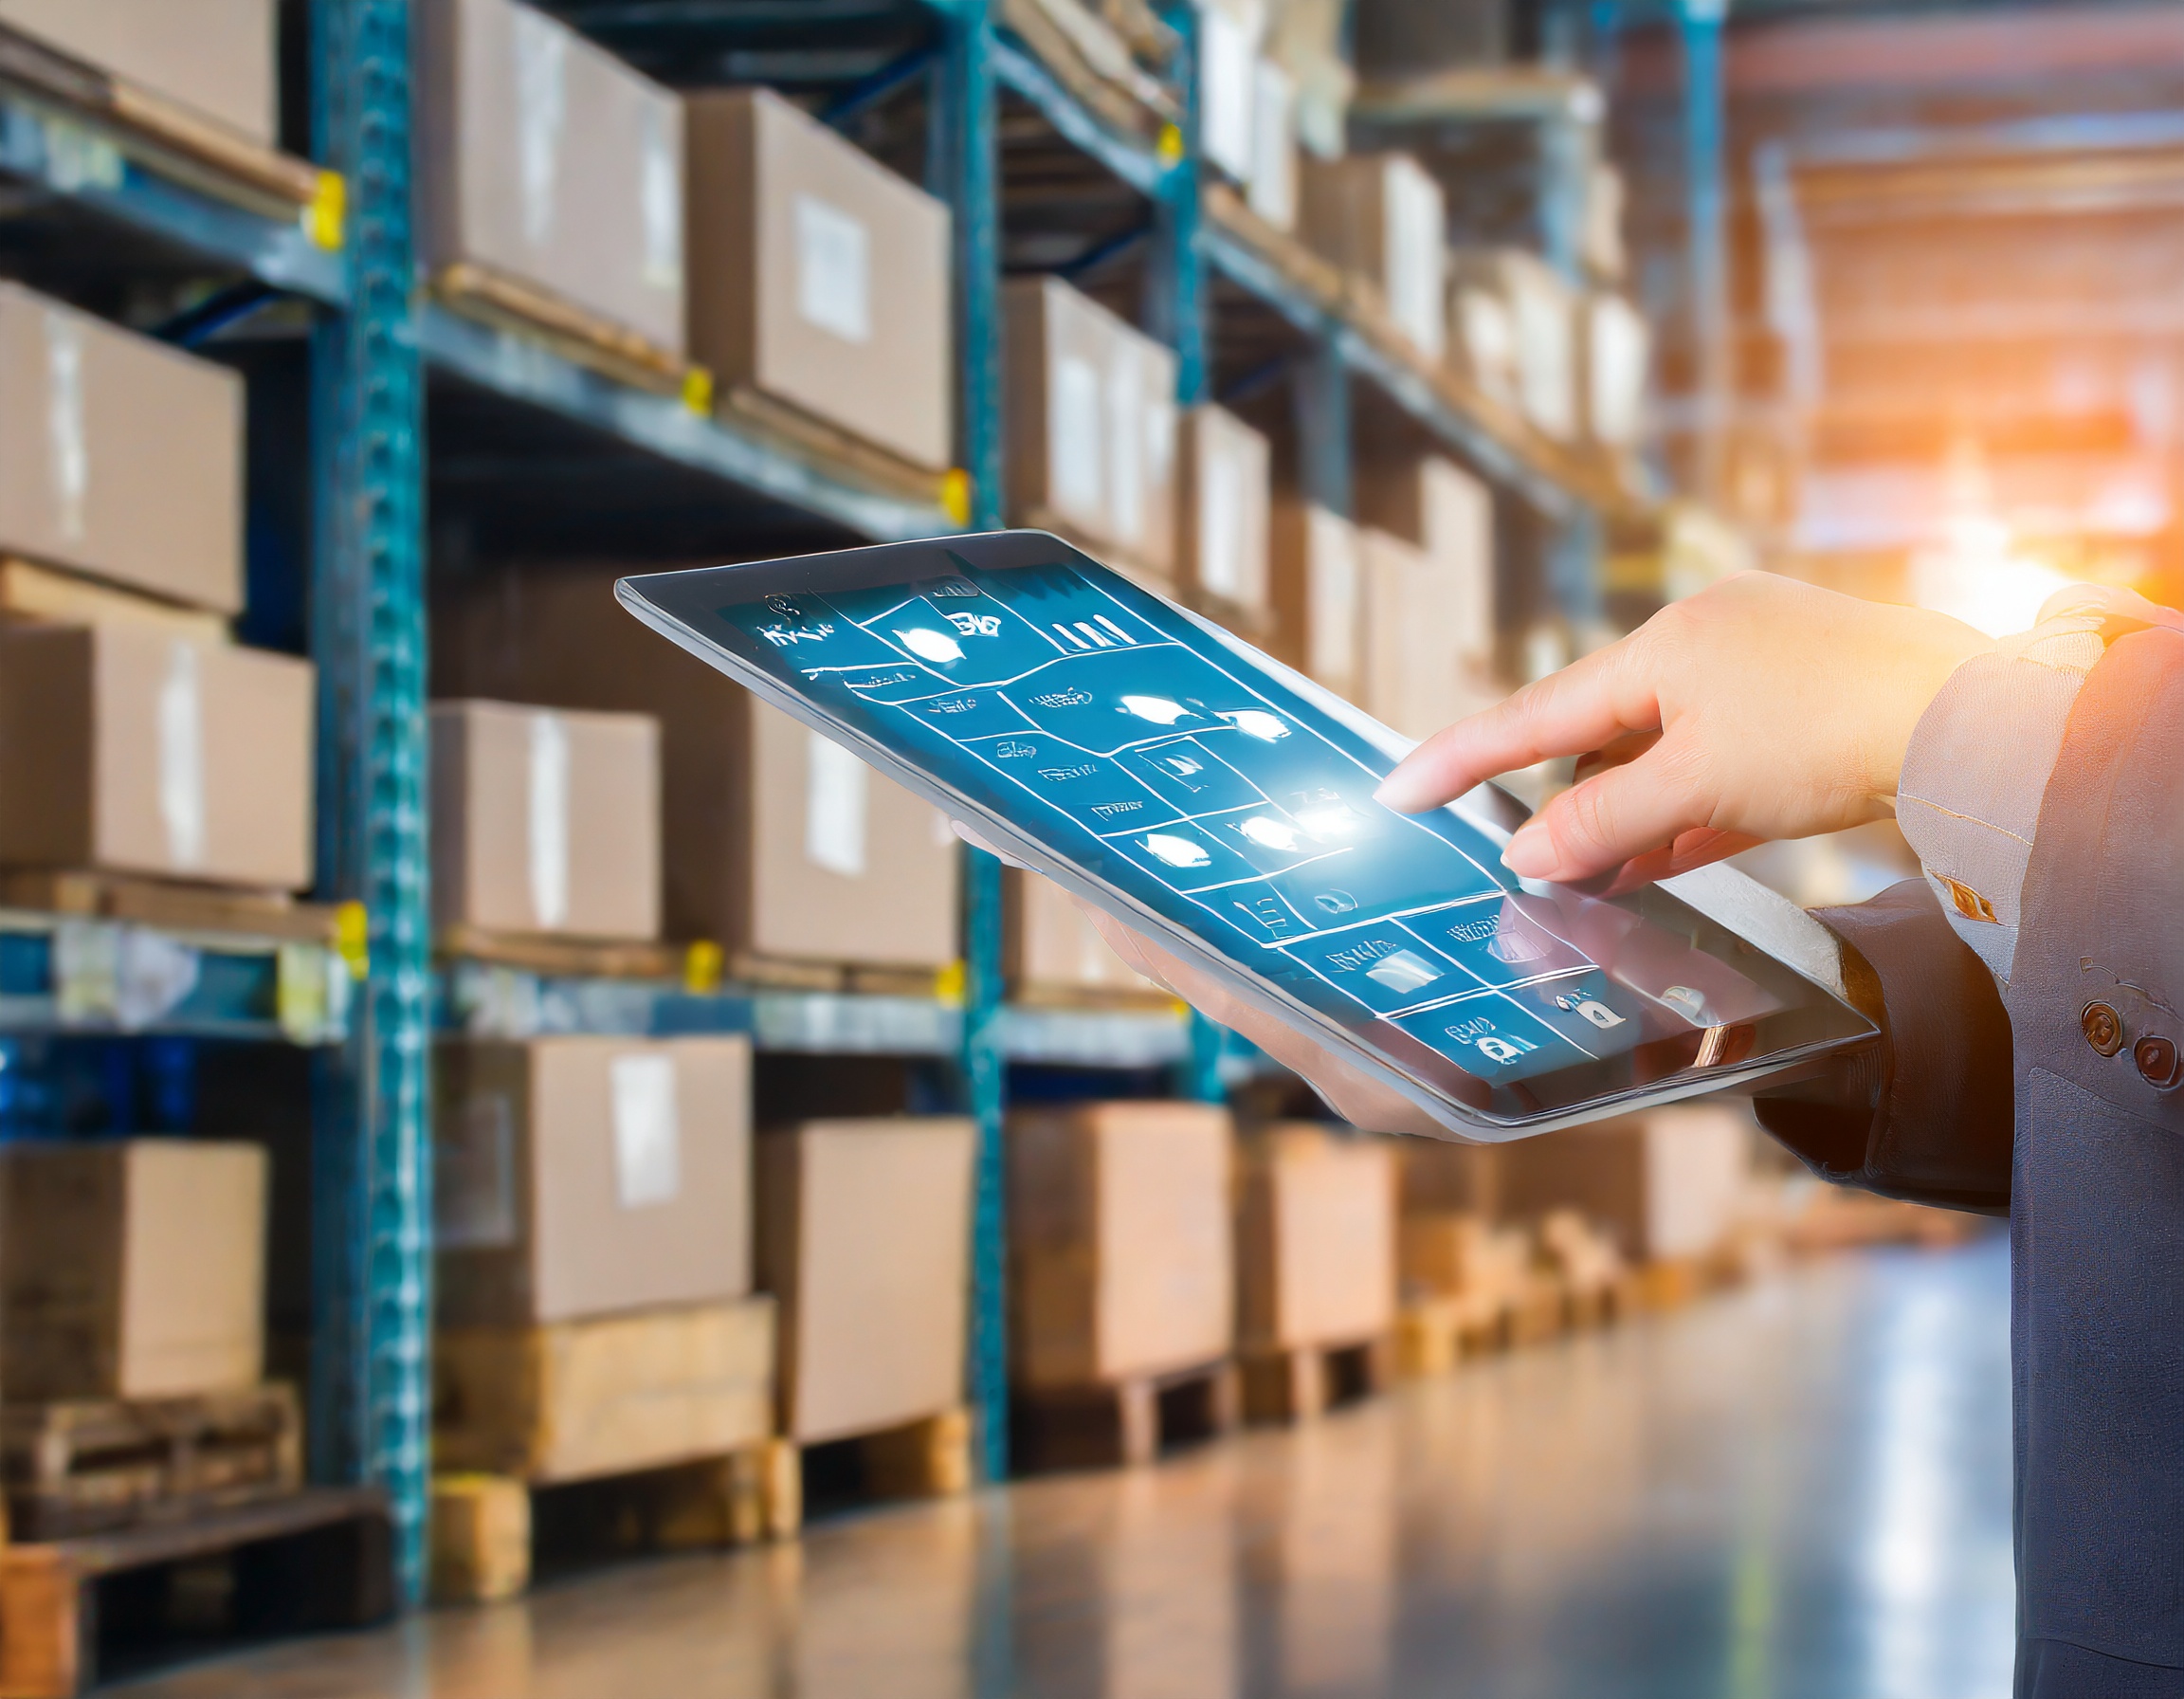 Firefly Inventory Management for warehouse software 43186